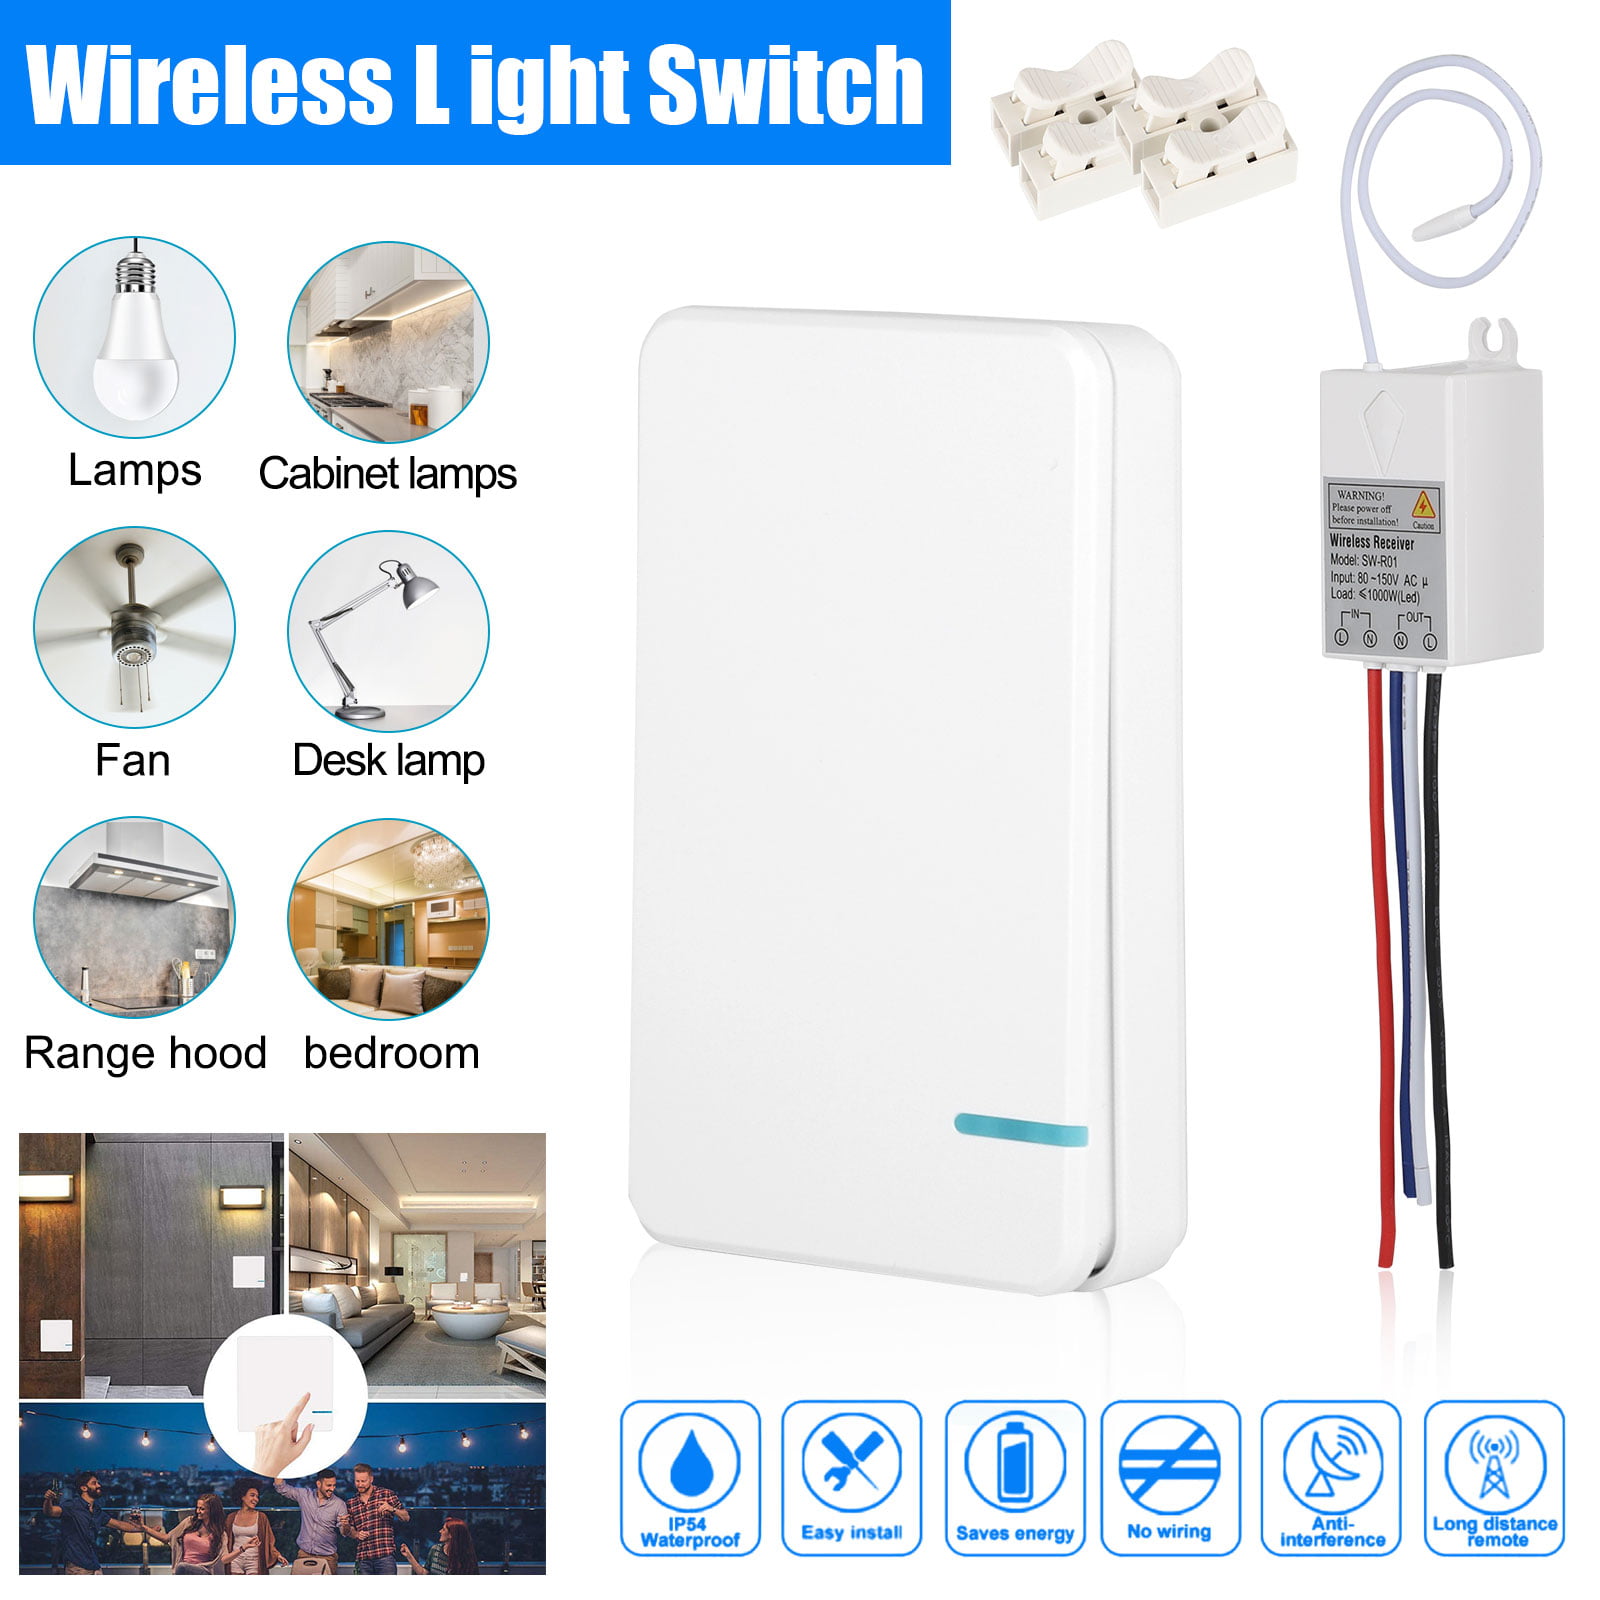 Wireless Light Switch And Receiver Kit Wall Switch Remote Control Lighting Fixture For Ceiling Lights Fans Lamps No In Wall Wiring Required 400m 1312ft Rf Range Programmable Walmart Com Walmart Com